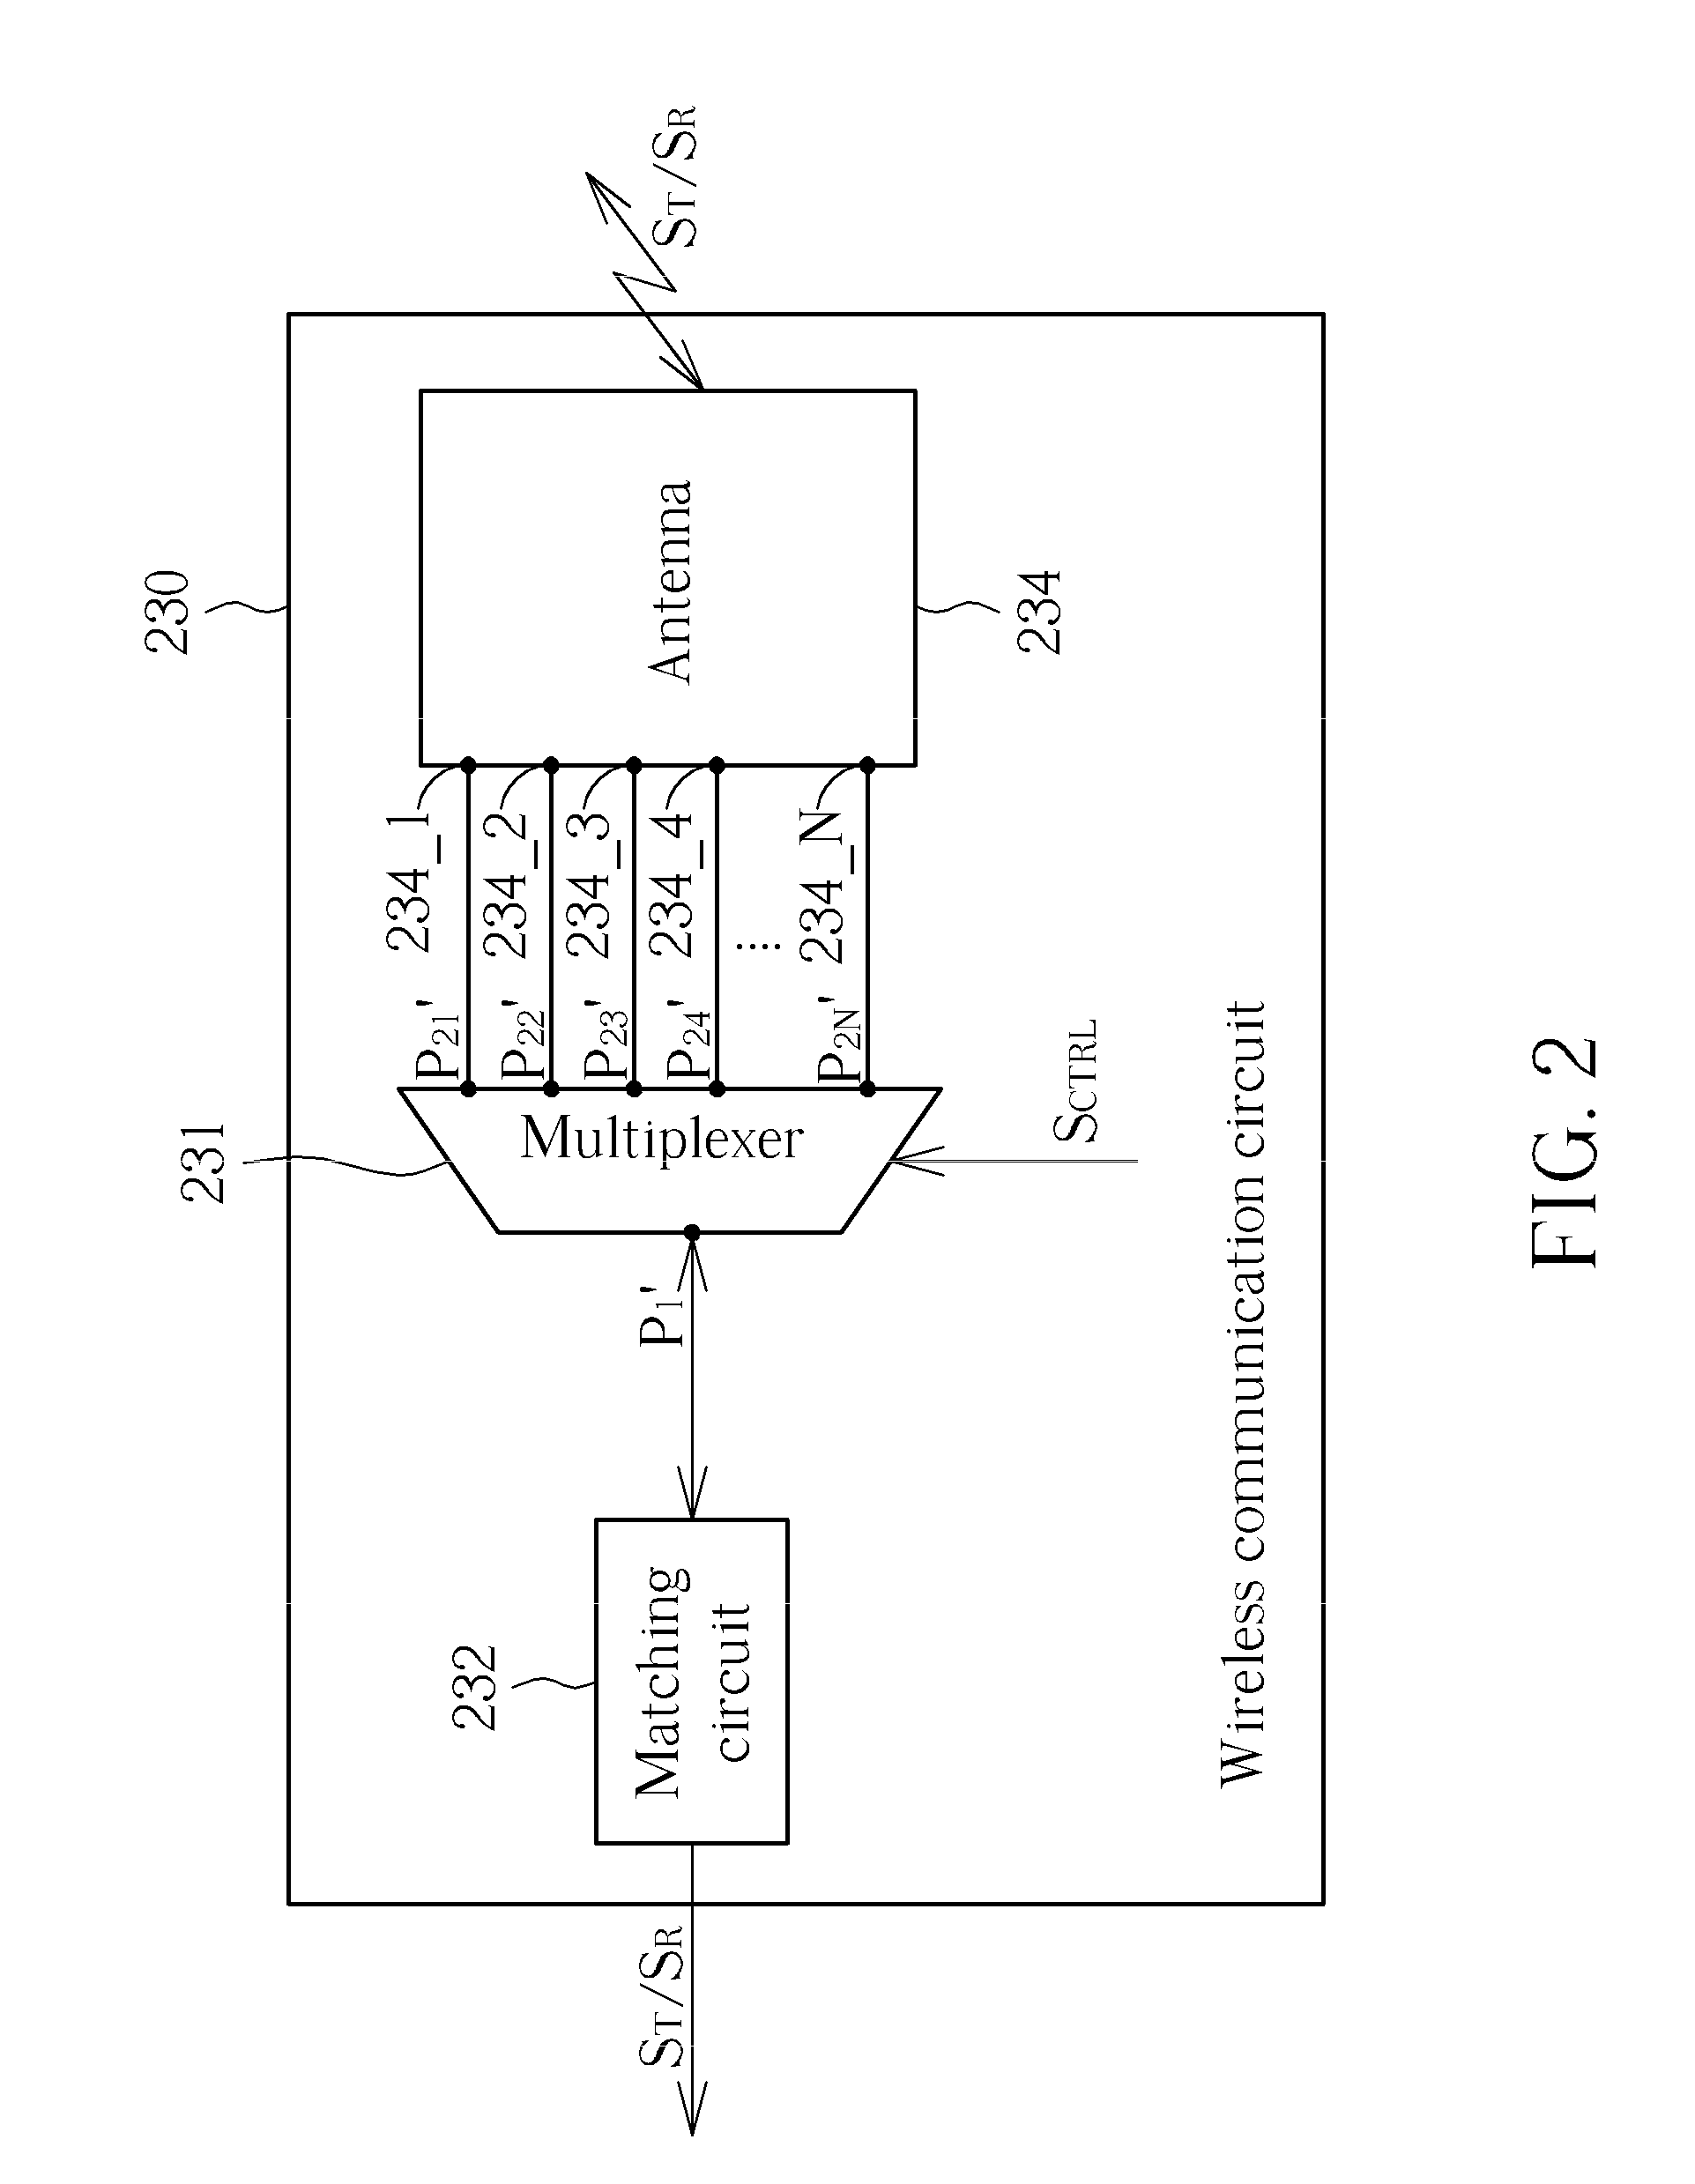 Wireless communication circuit capable of adaptively adjusting circuit configuration thereof according to change in surroundings and related wireless communication method